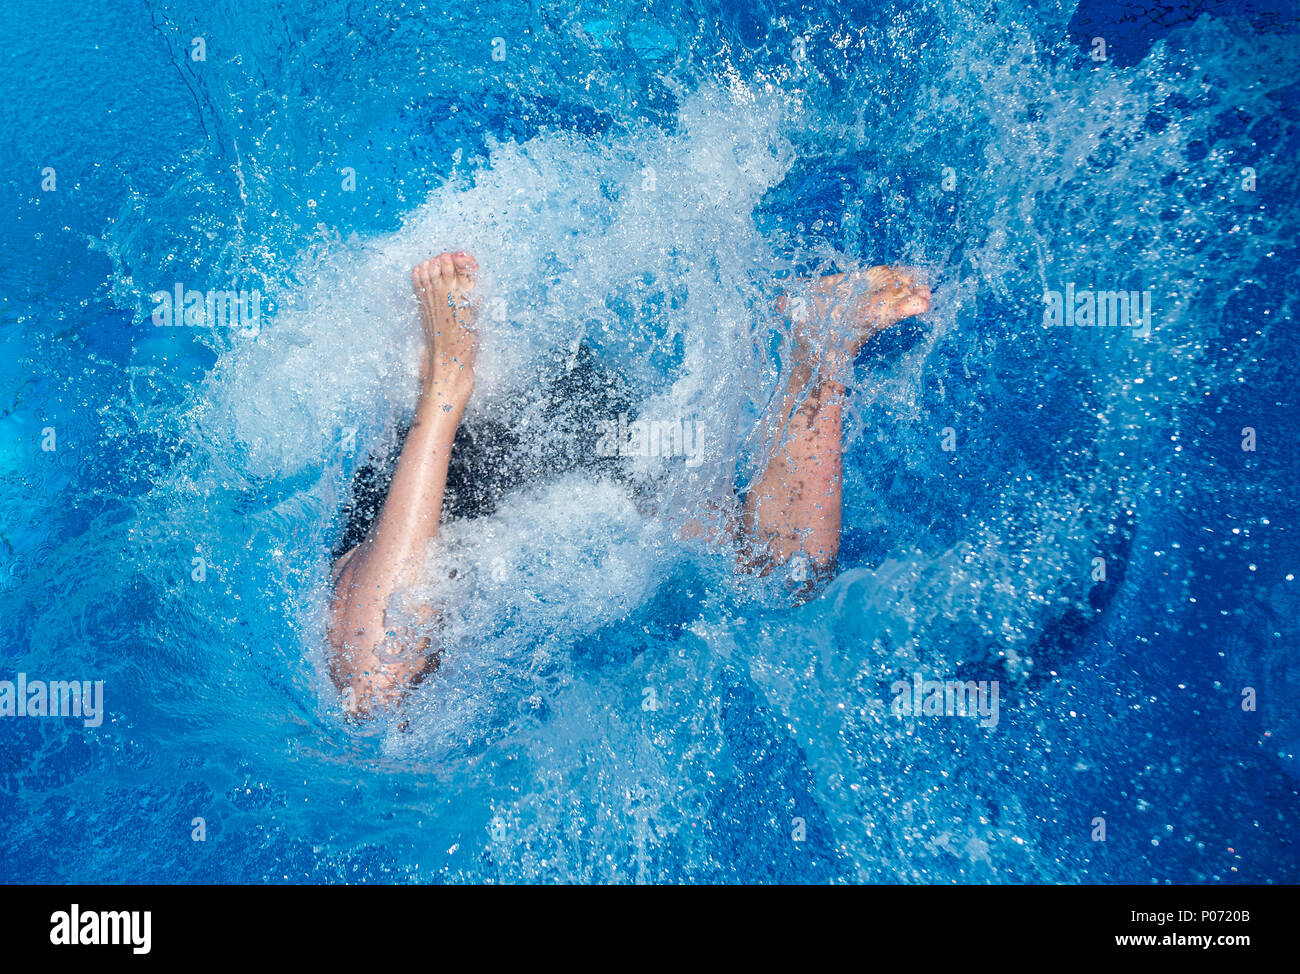 07 June 2018, Germany, Hanover: A youth jumps from a diving tower at the Lister Freibad open air swimming pool. Photo: Hauke-Christian Dittrich/dpa Stock Photo